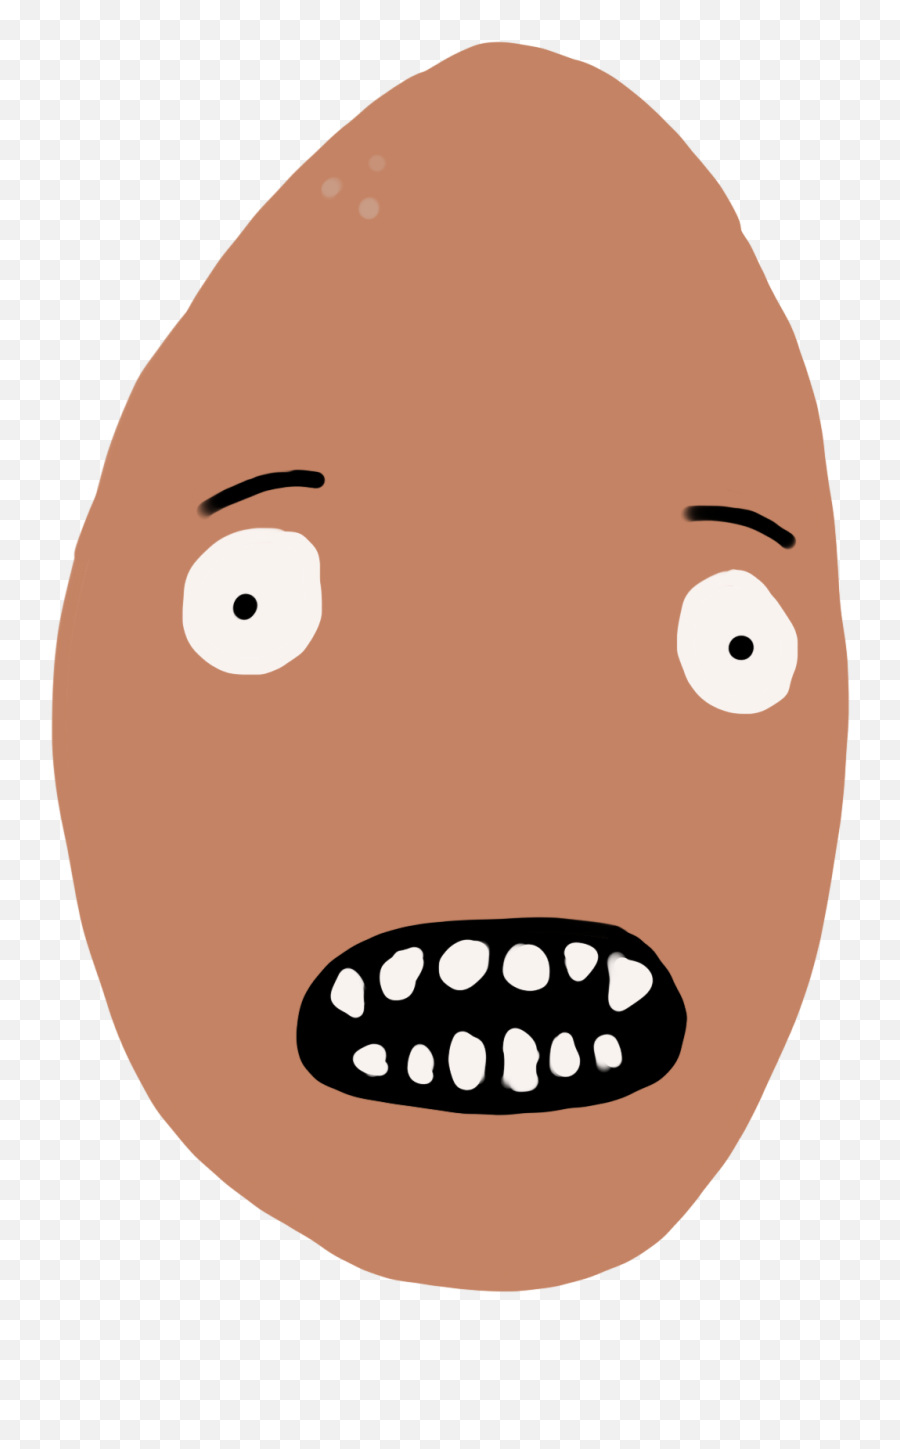 Egghead Gifs - Get The Best Gif On Giphy Emoji,Confusedlook Emoticon